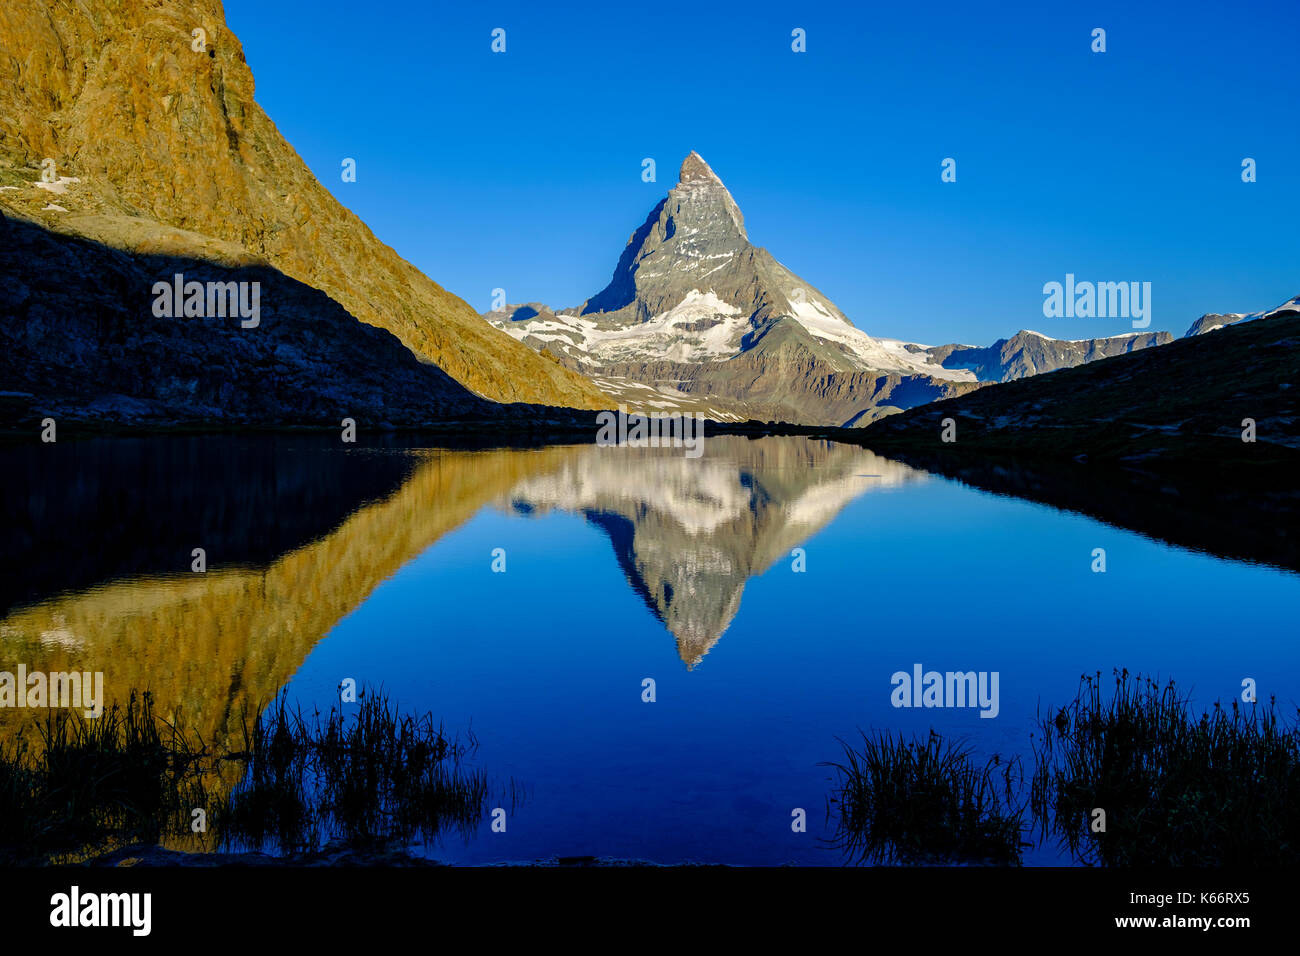 The East Face of the Matterhorn, Monte Cervino, mirroring in the Lake ...